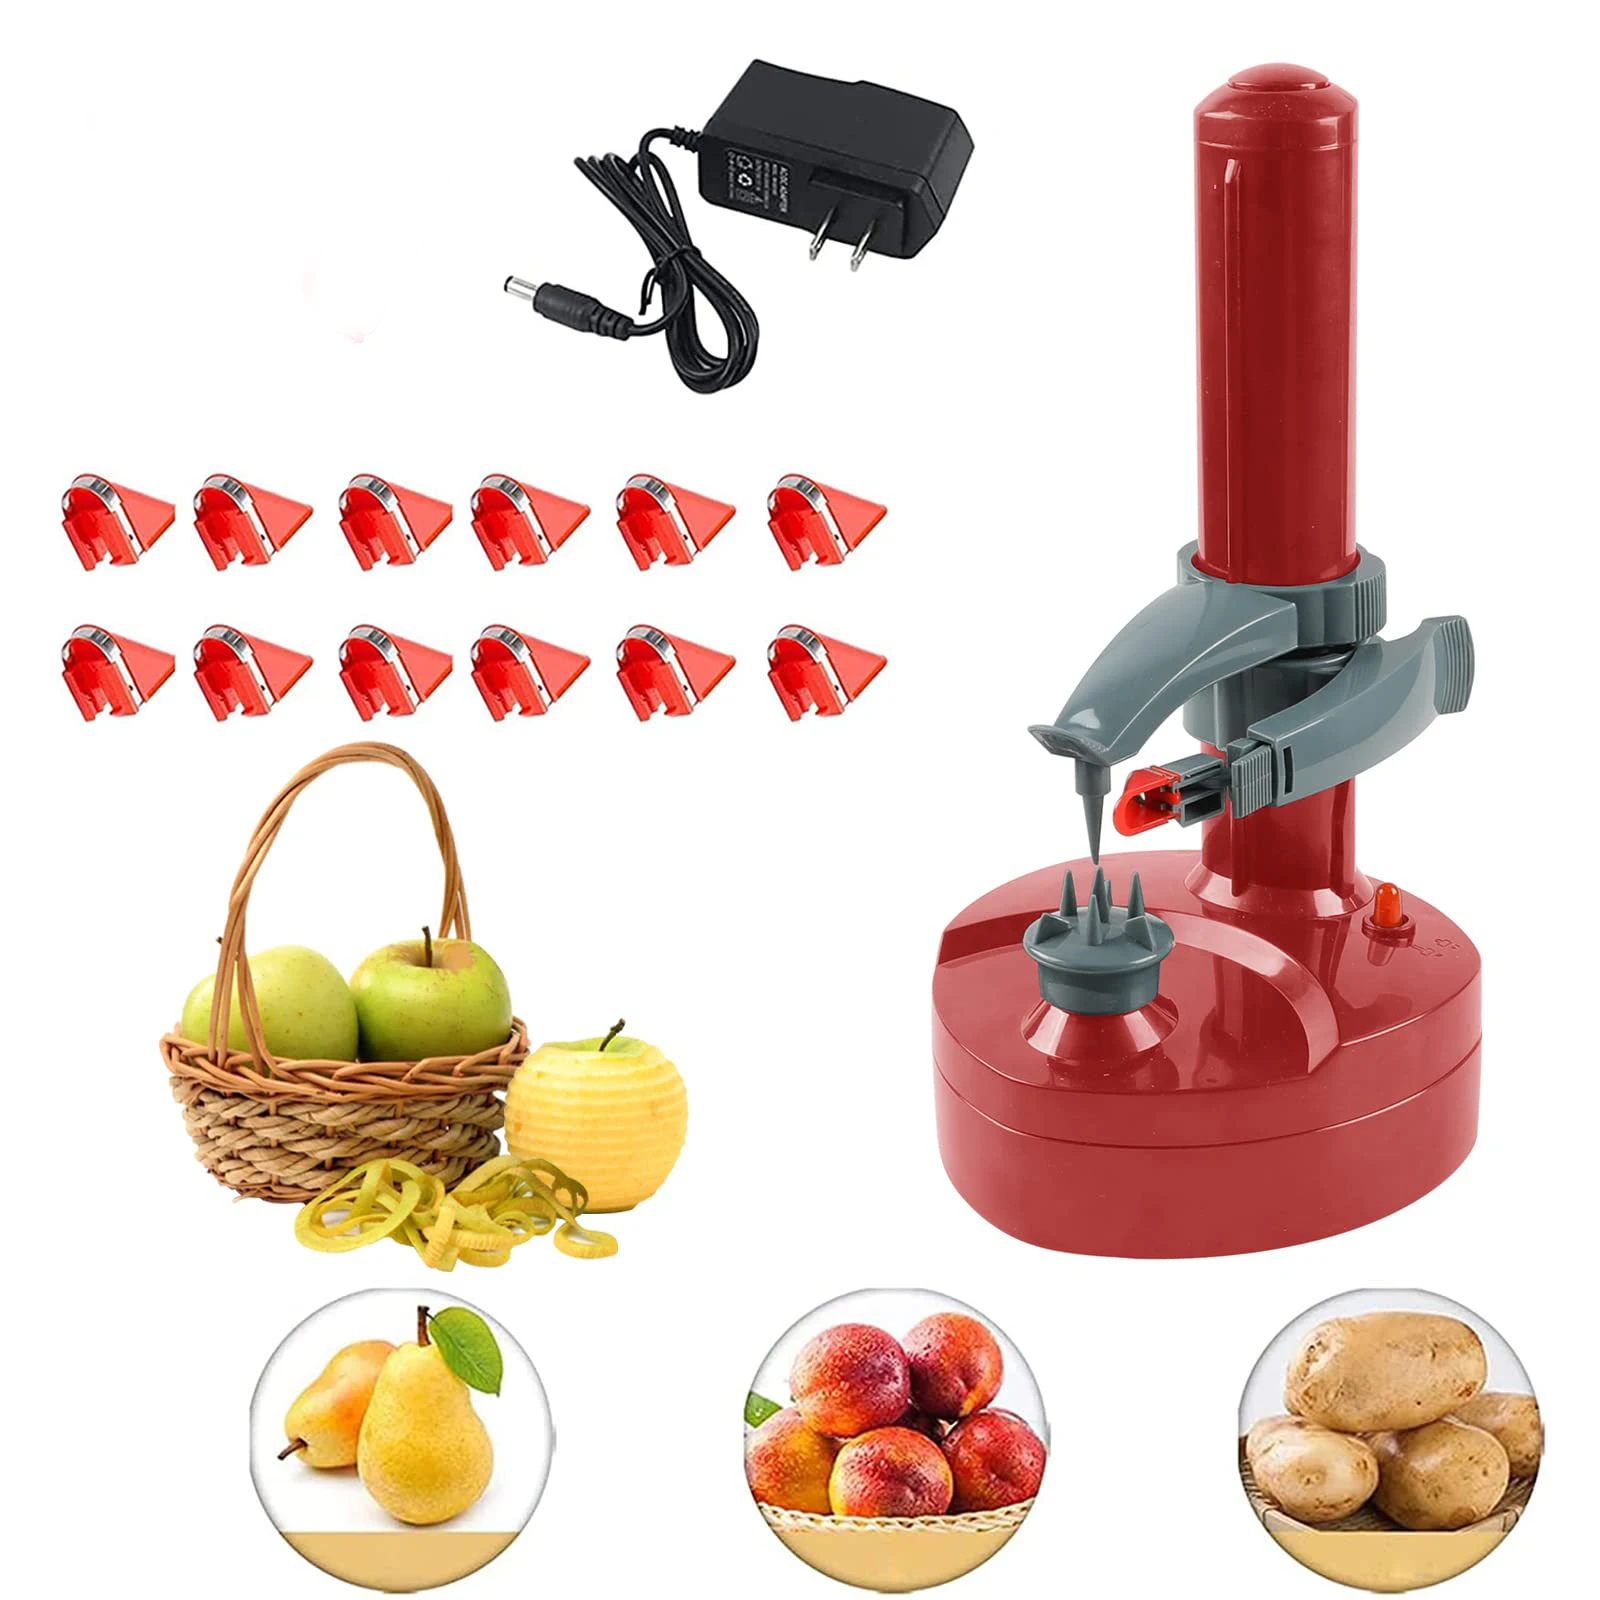 

Electric Potato Peeler Automatic Apple Peeler for Fruits and Vegetables with 12 Replacement Blades, Peeling Tool Cutter